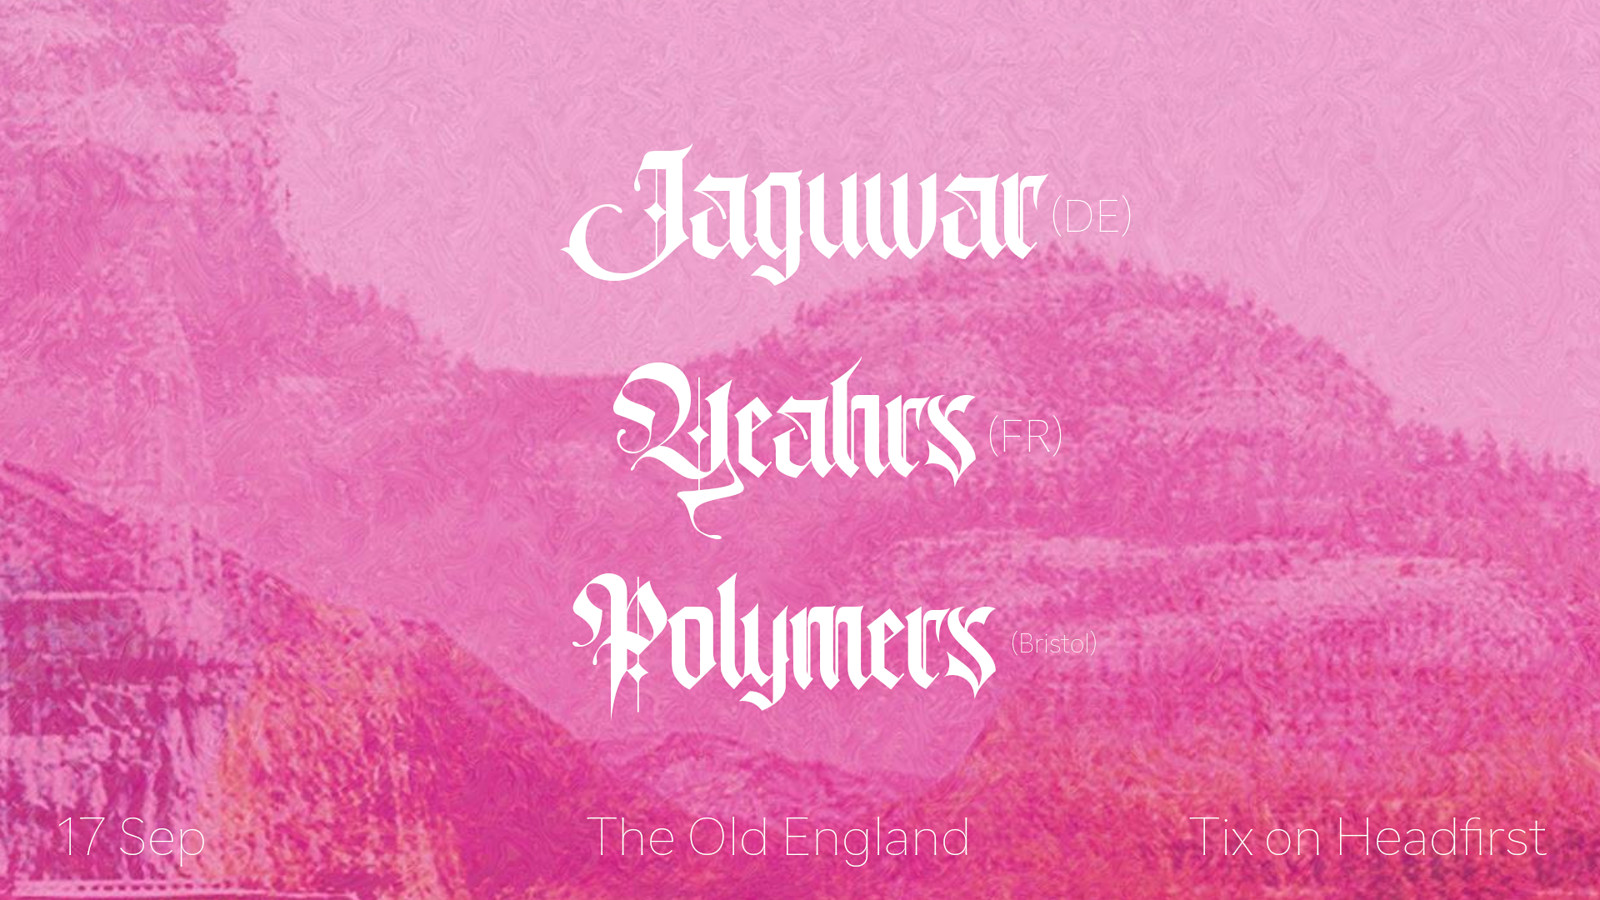 JAGUWAR / YEAHRS / POLYMERS + more tba at The Old England Pub